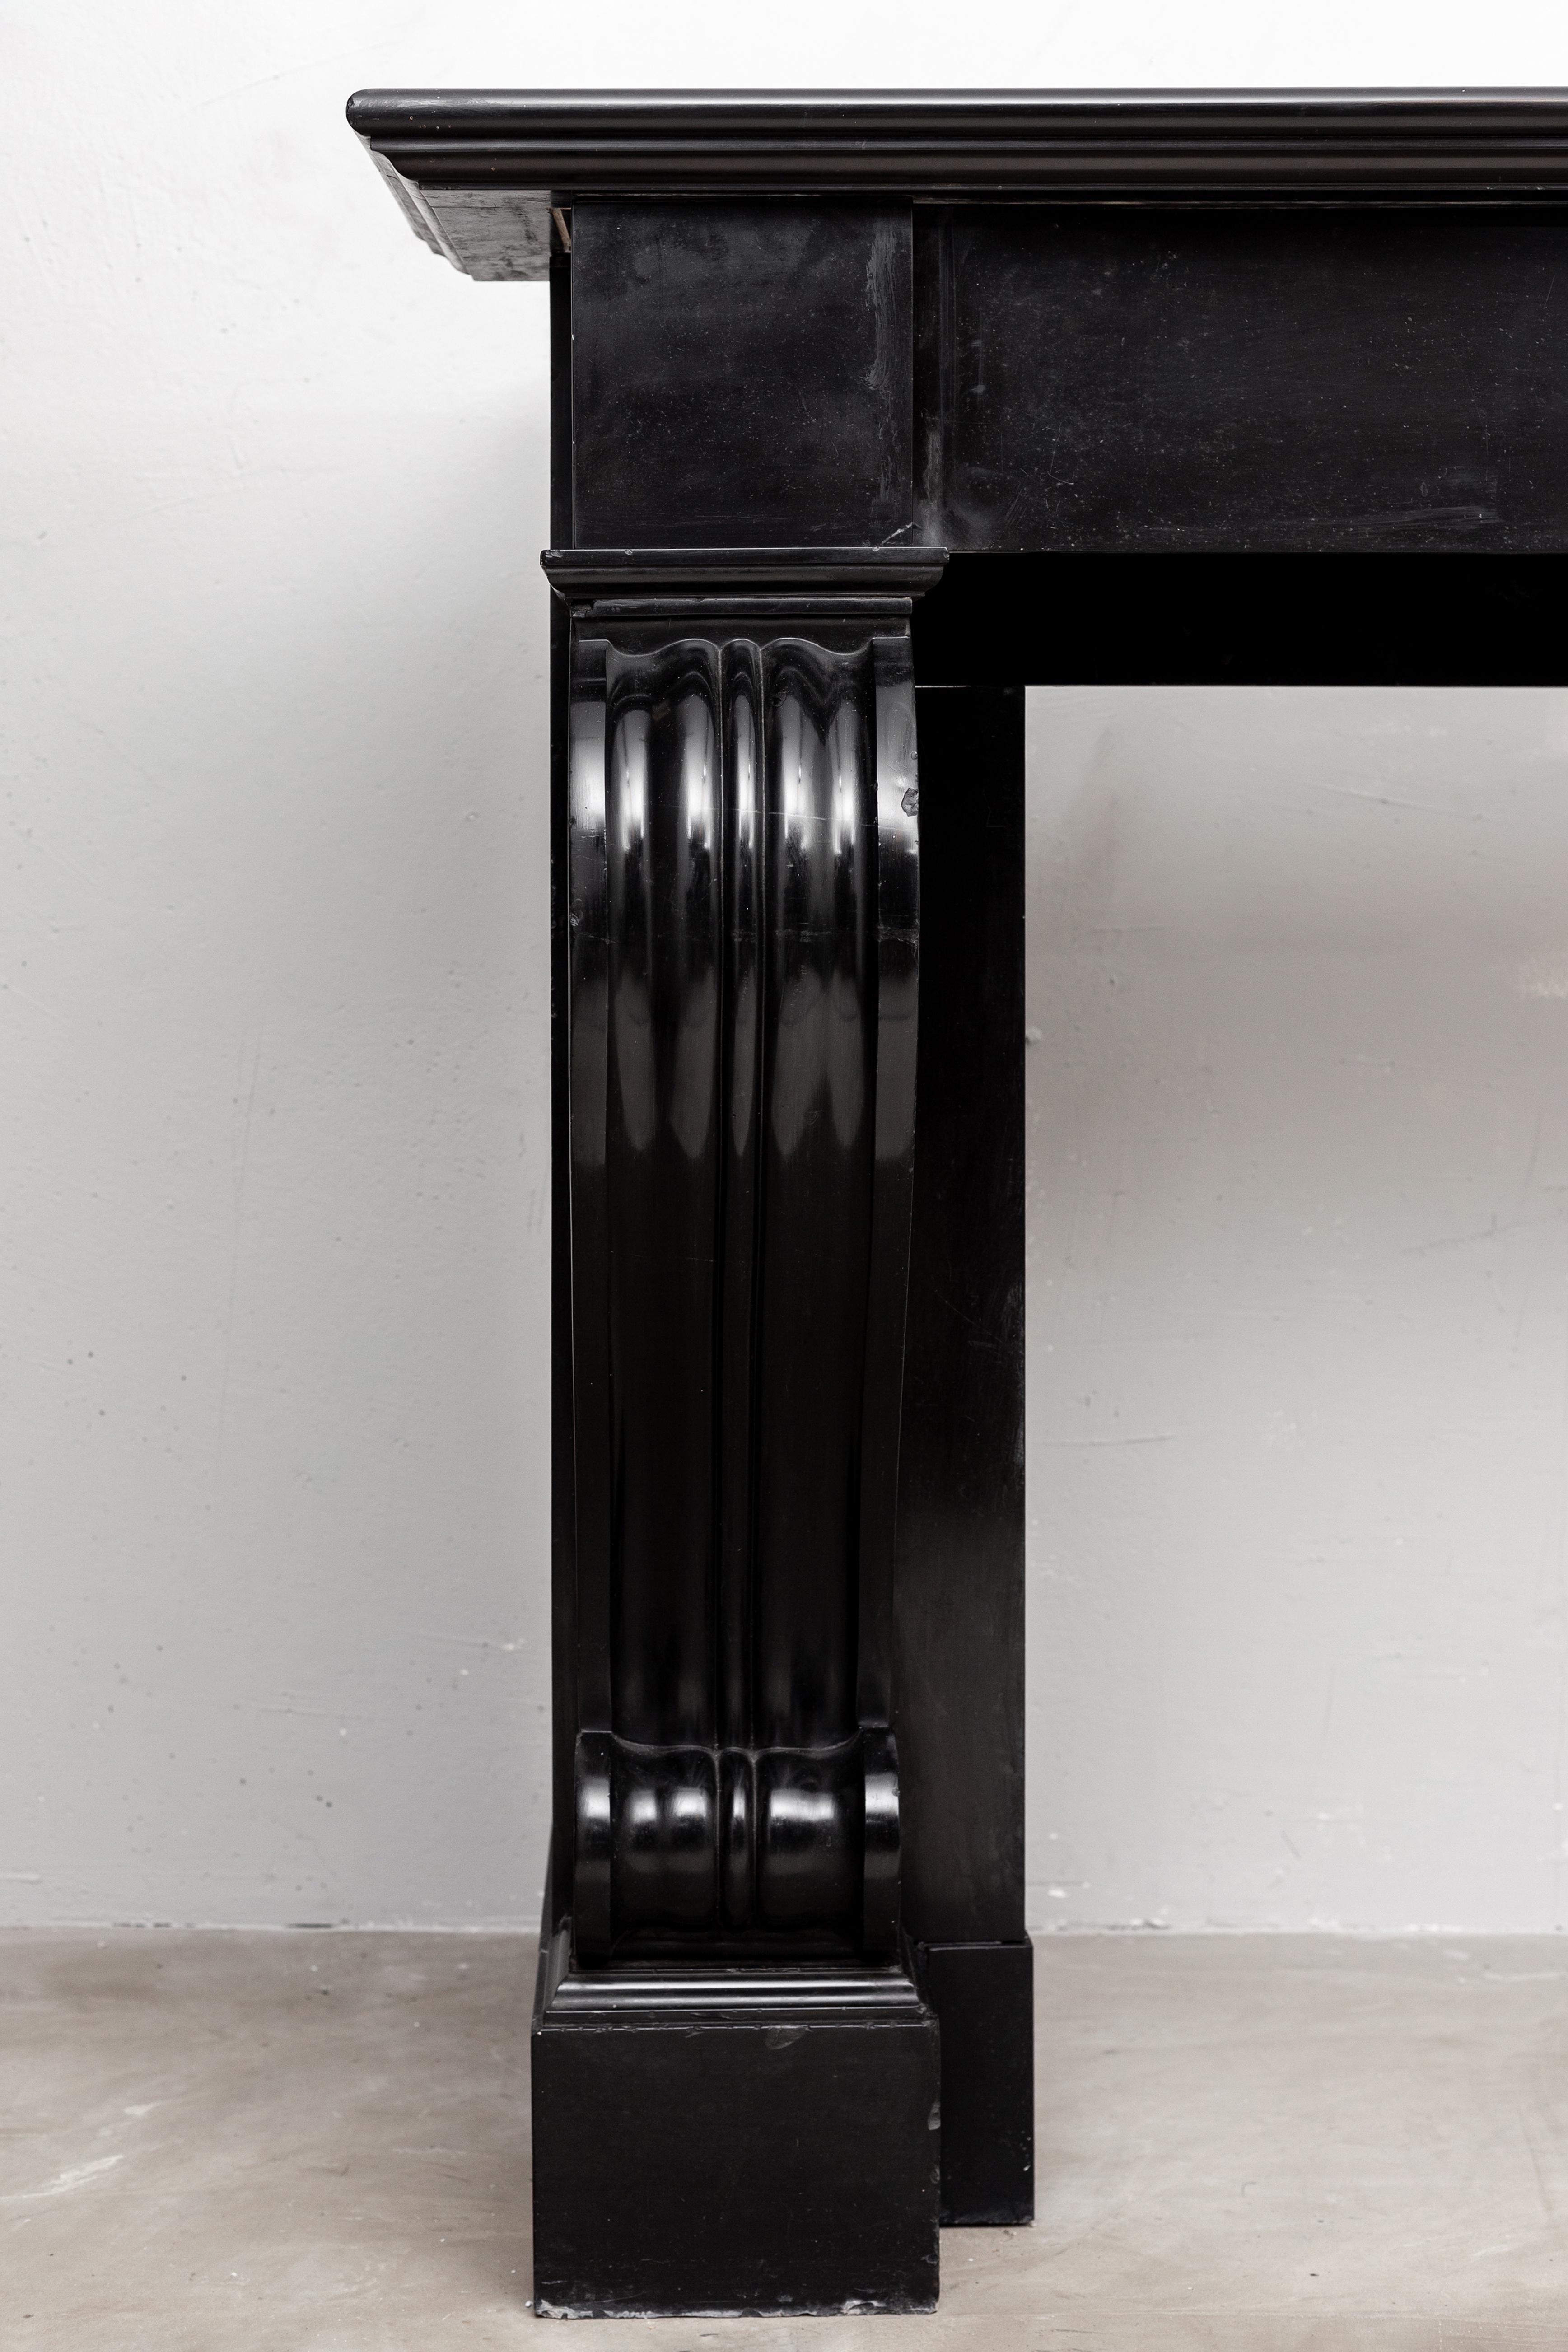 This Louis Philippe fireplace comes straight from a Utrecht canal house. The allure radiates from it and the Noir de Mazy version makes it a showpiece.
The heavy solid consoles have beautiful profiling on the front and both sides, which gives the